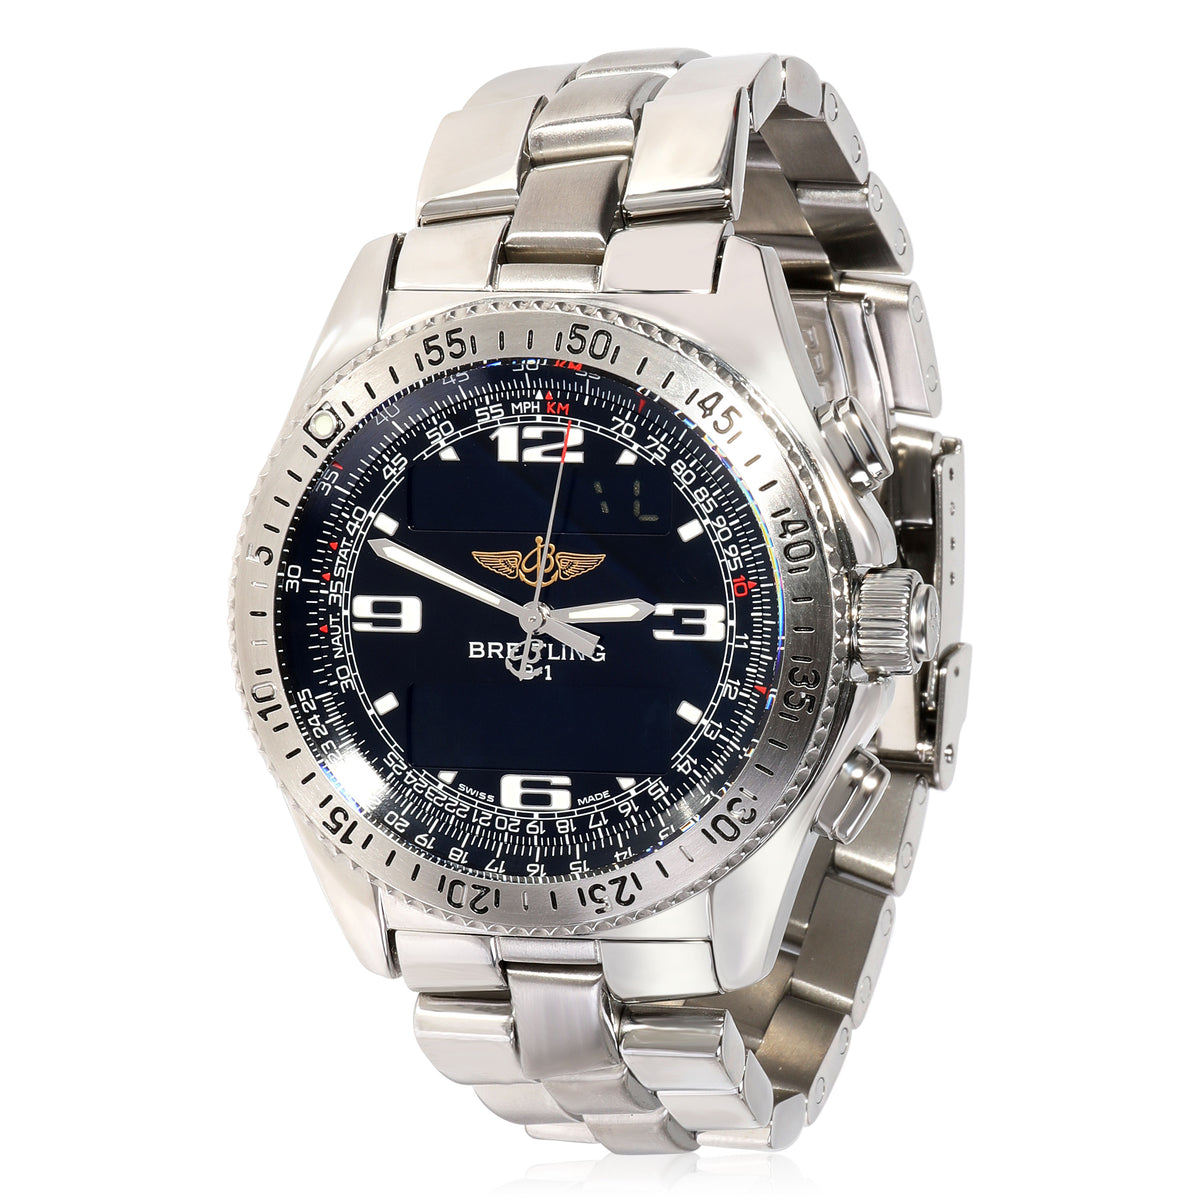 Breitling Professional B-1 A68362 Men's Watch in  Stainless Steel